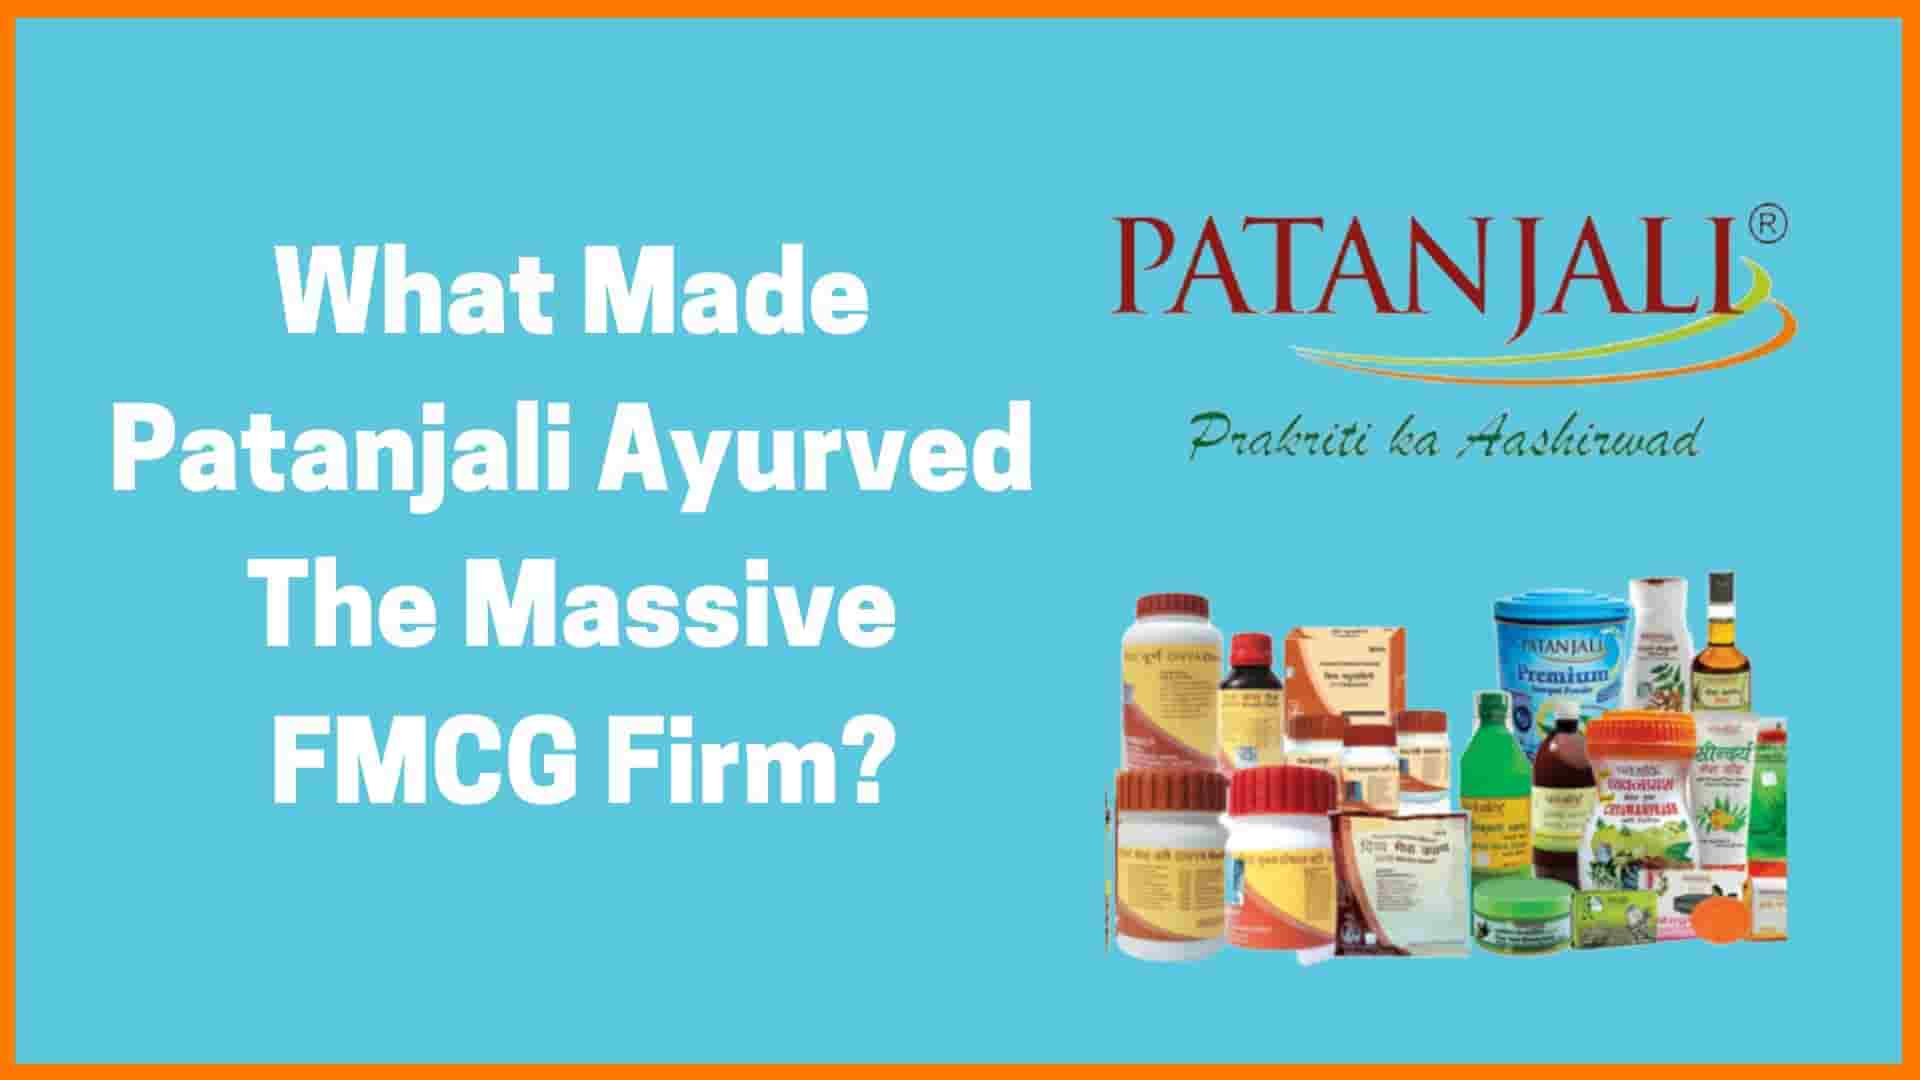 What Made Patanjali Ayurved The Massive FMCG Firm - Patanjali Case Study